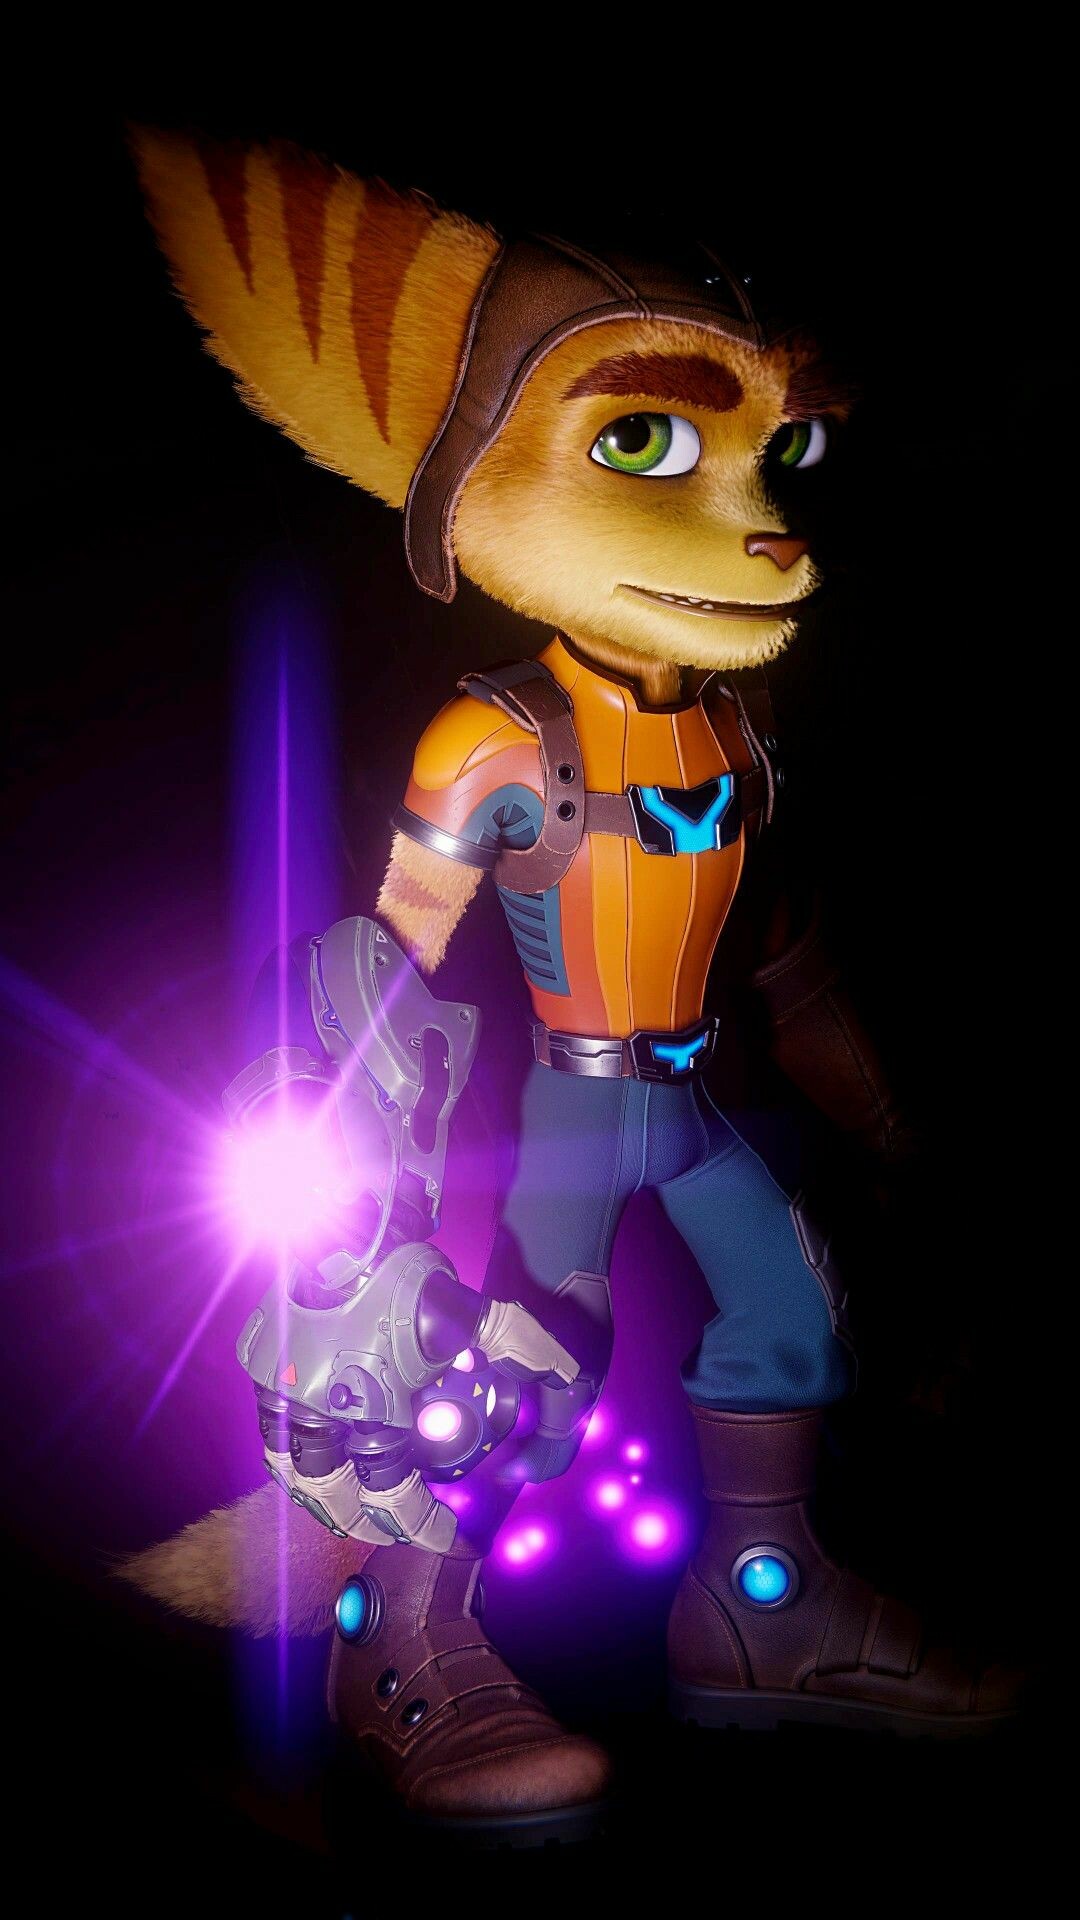 Ratchet and Clank: Rift Apart: A playable character, Uses his skills as a mechanic, a pilot, and a combatant to protect the universe from threats. 1080x1920 Full HD Background.